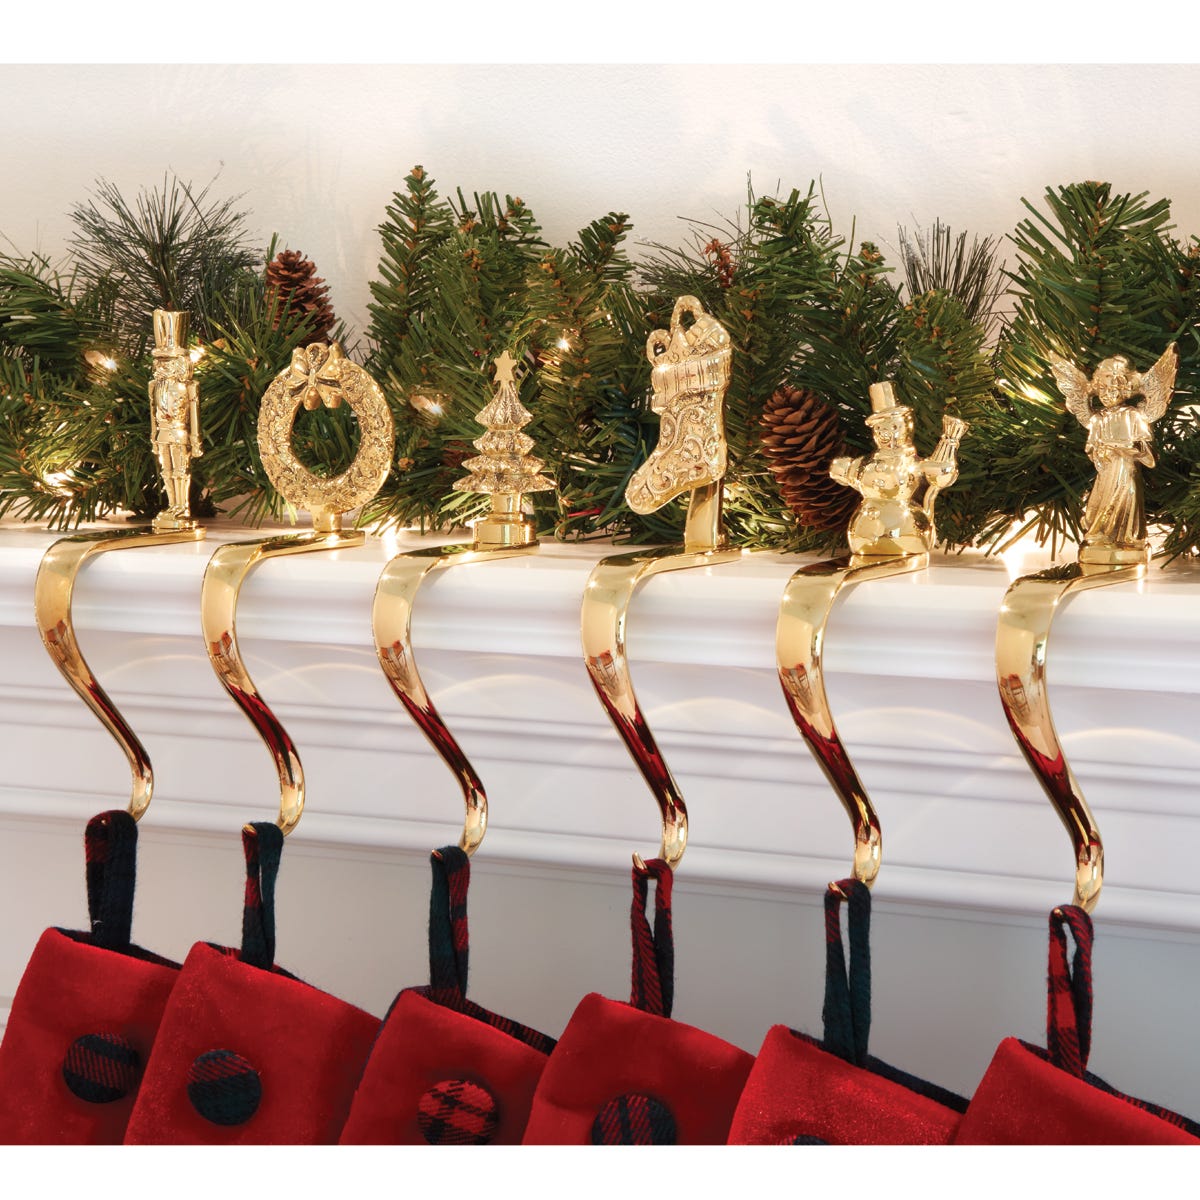 Hang your stockings with care using these solid brass holders. All are exclusive designs and highly polished to a brilliant luster. Hooks stay in place with the weight of the stocking. Unique offset design is perfect for mantels or shelves.